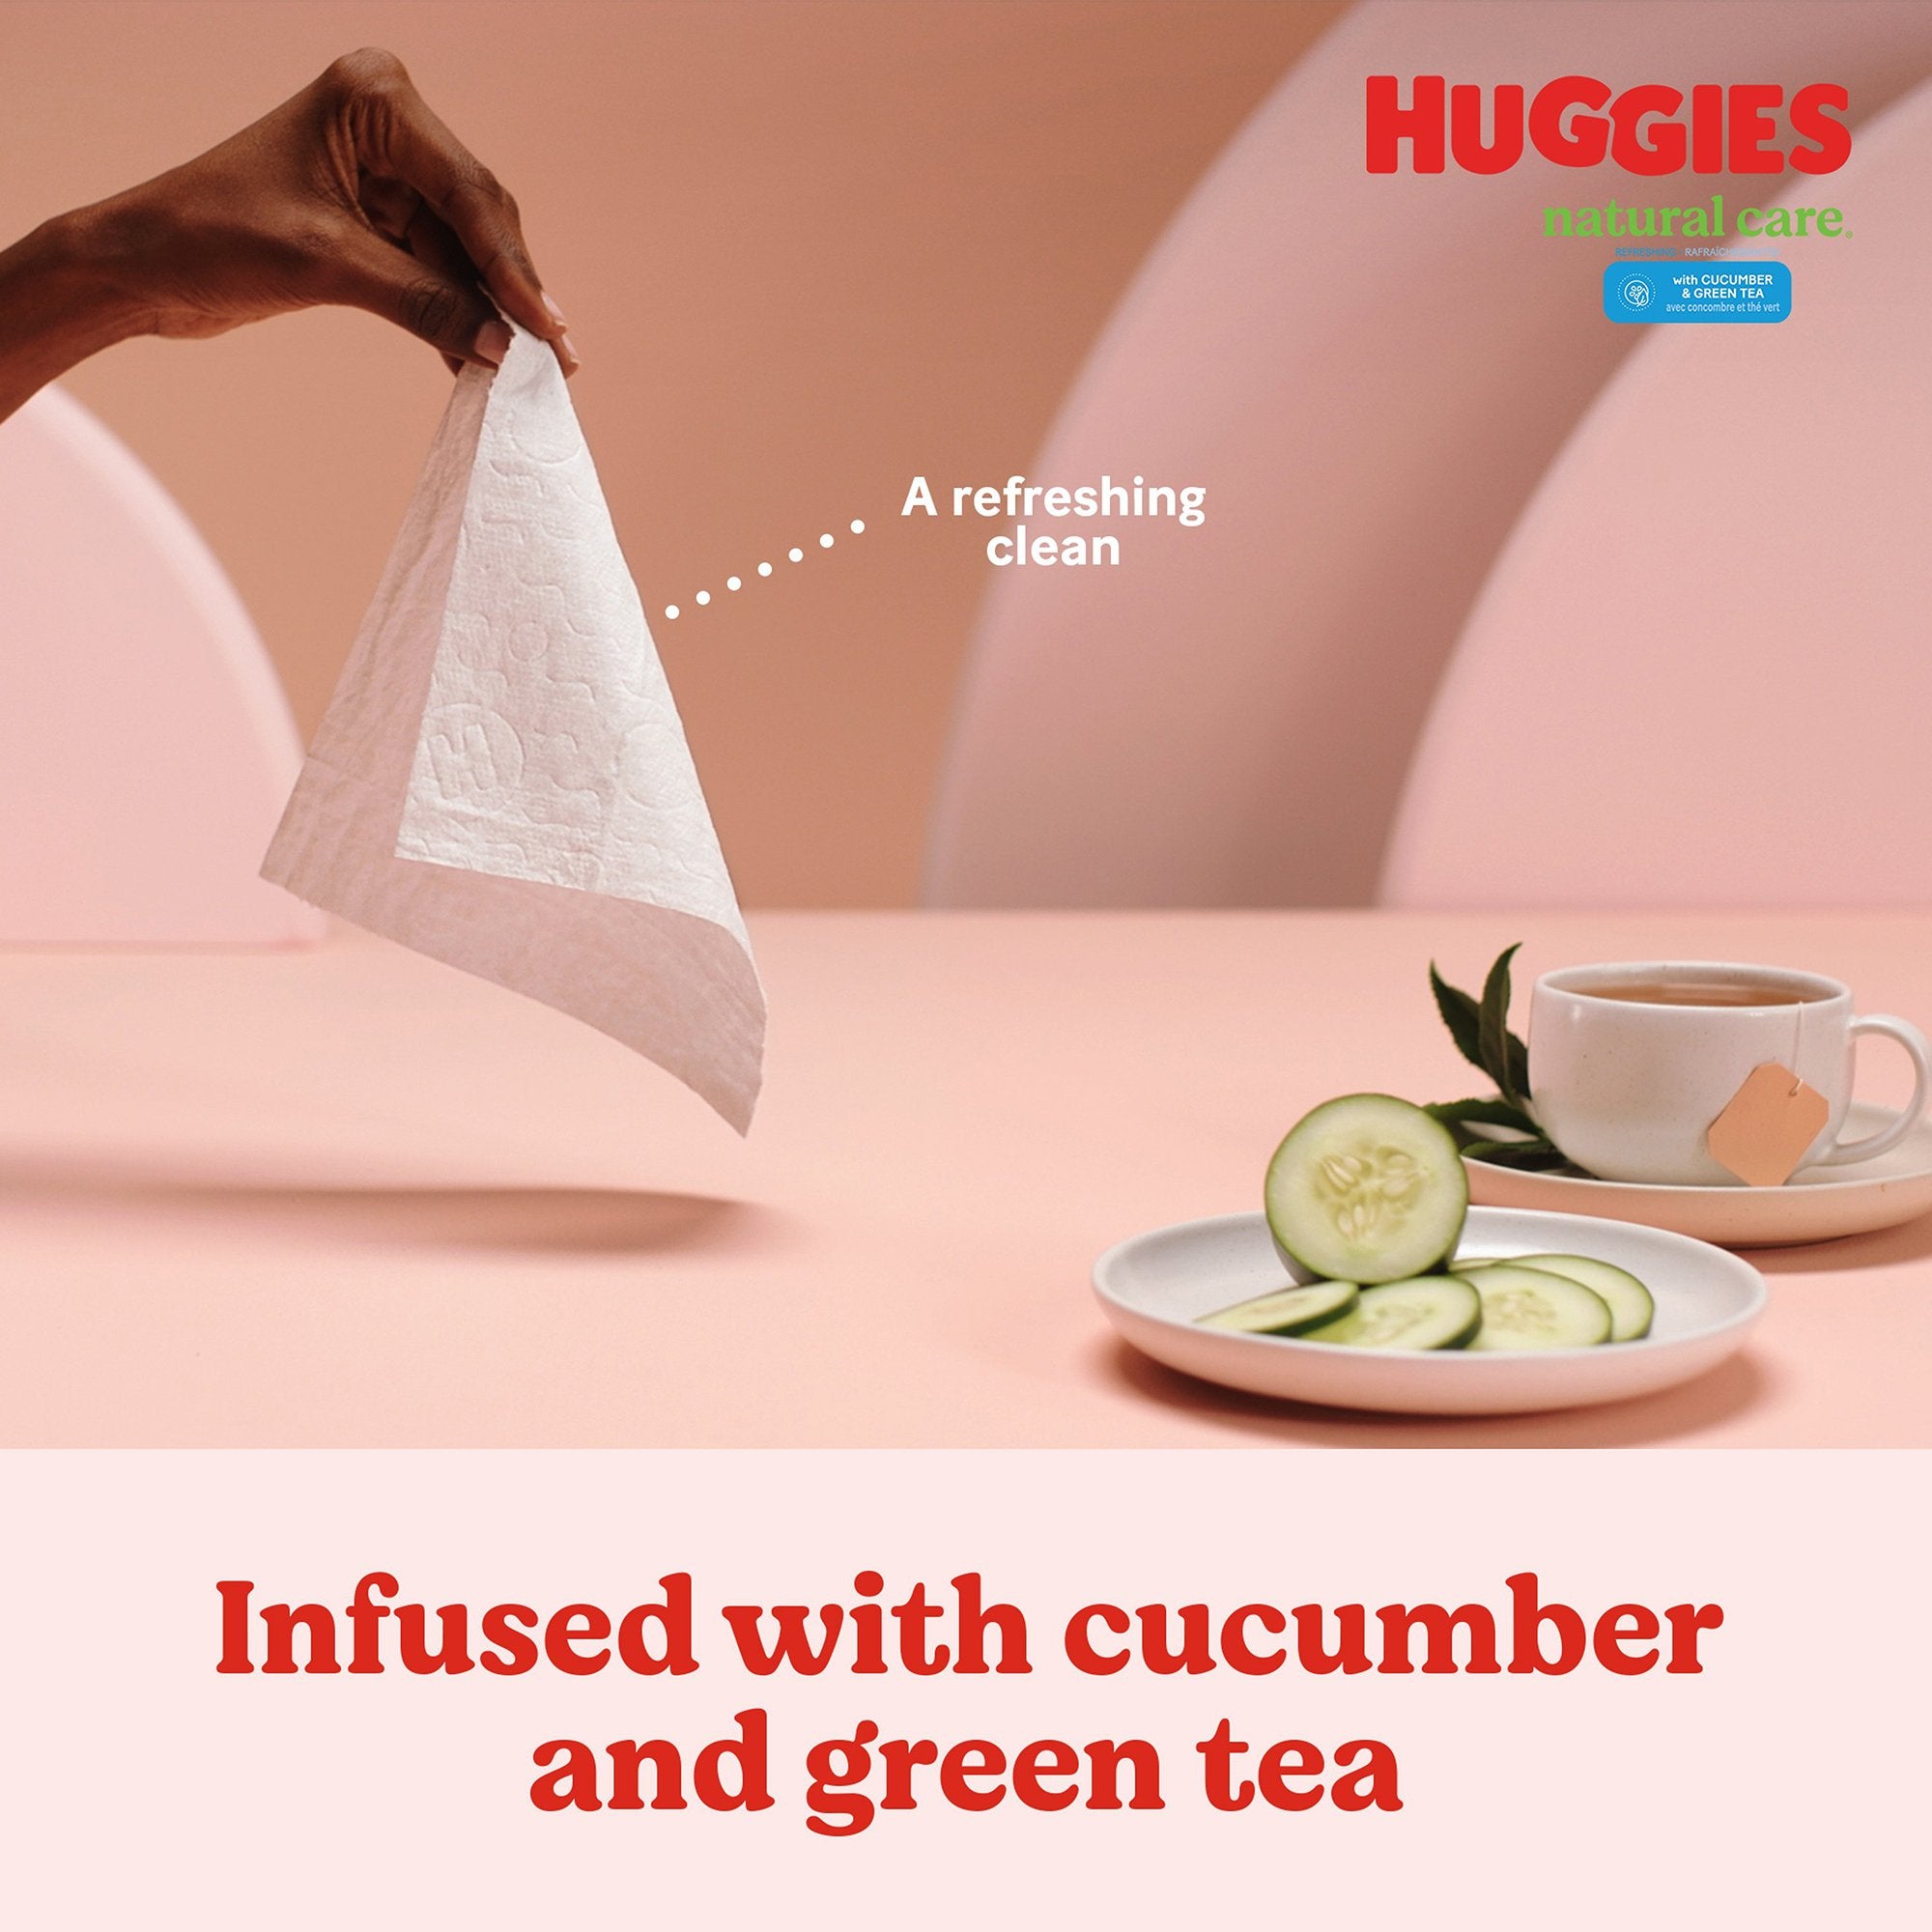 Baby Wipe Huggies® Natural Care™ Refreshing Soft Pack Cucumber / Green Tea Scent 560 Count